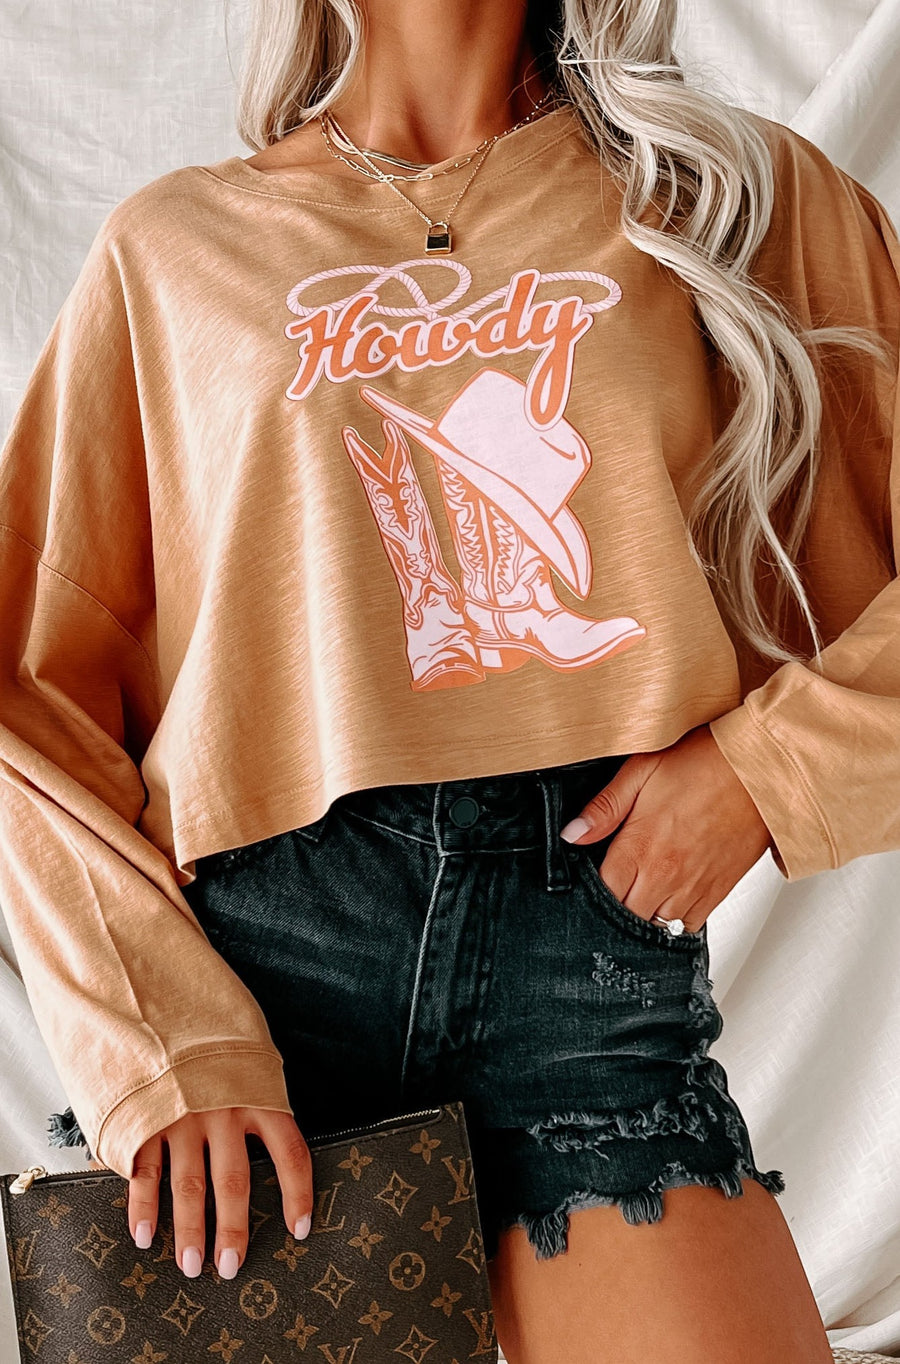 Howdy There Long Sleeve Graphic Crop Top (Peanut Butter) - Print On Demand - NanaMacs